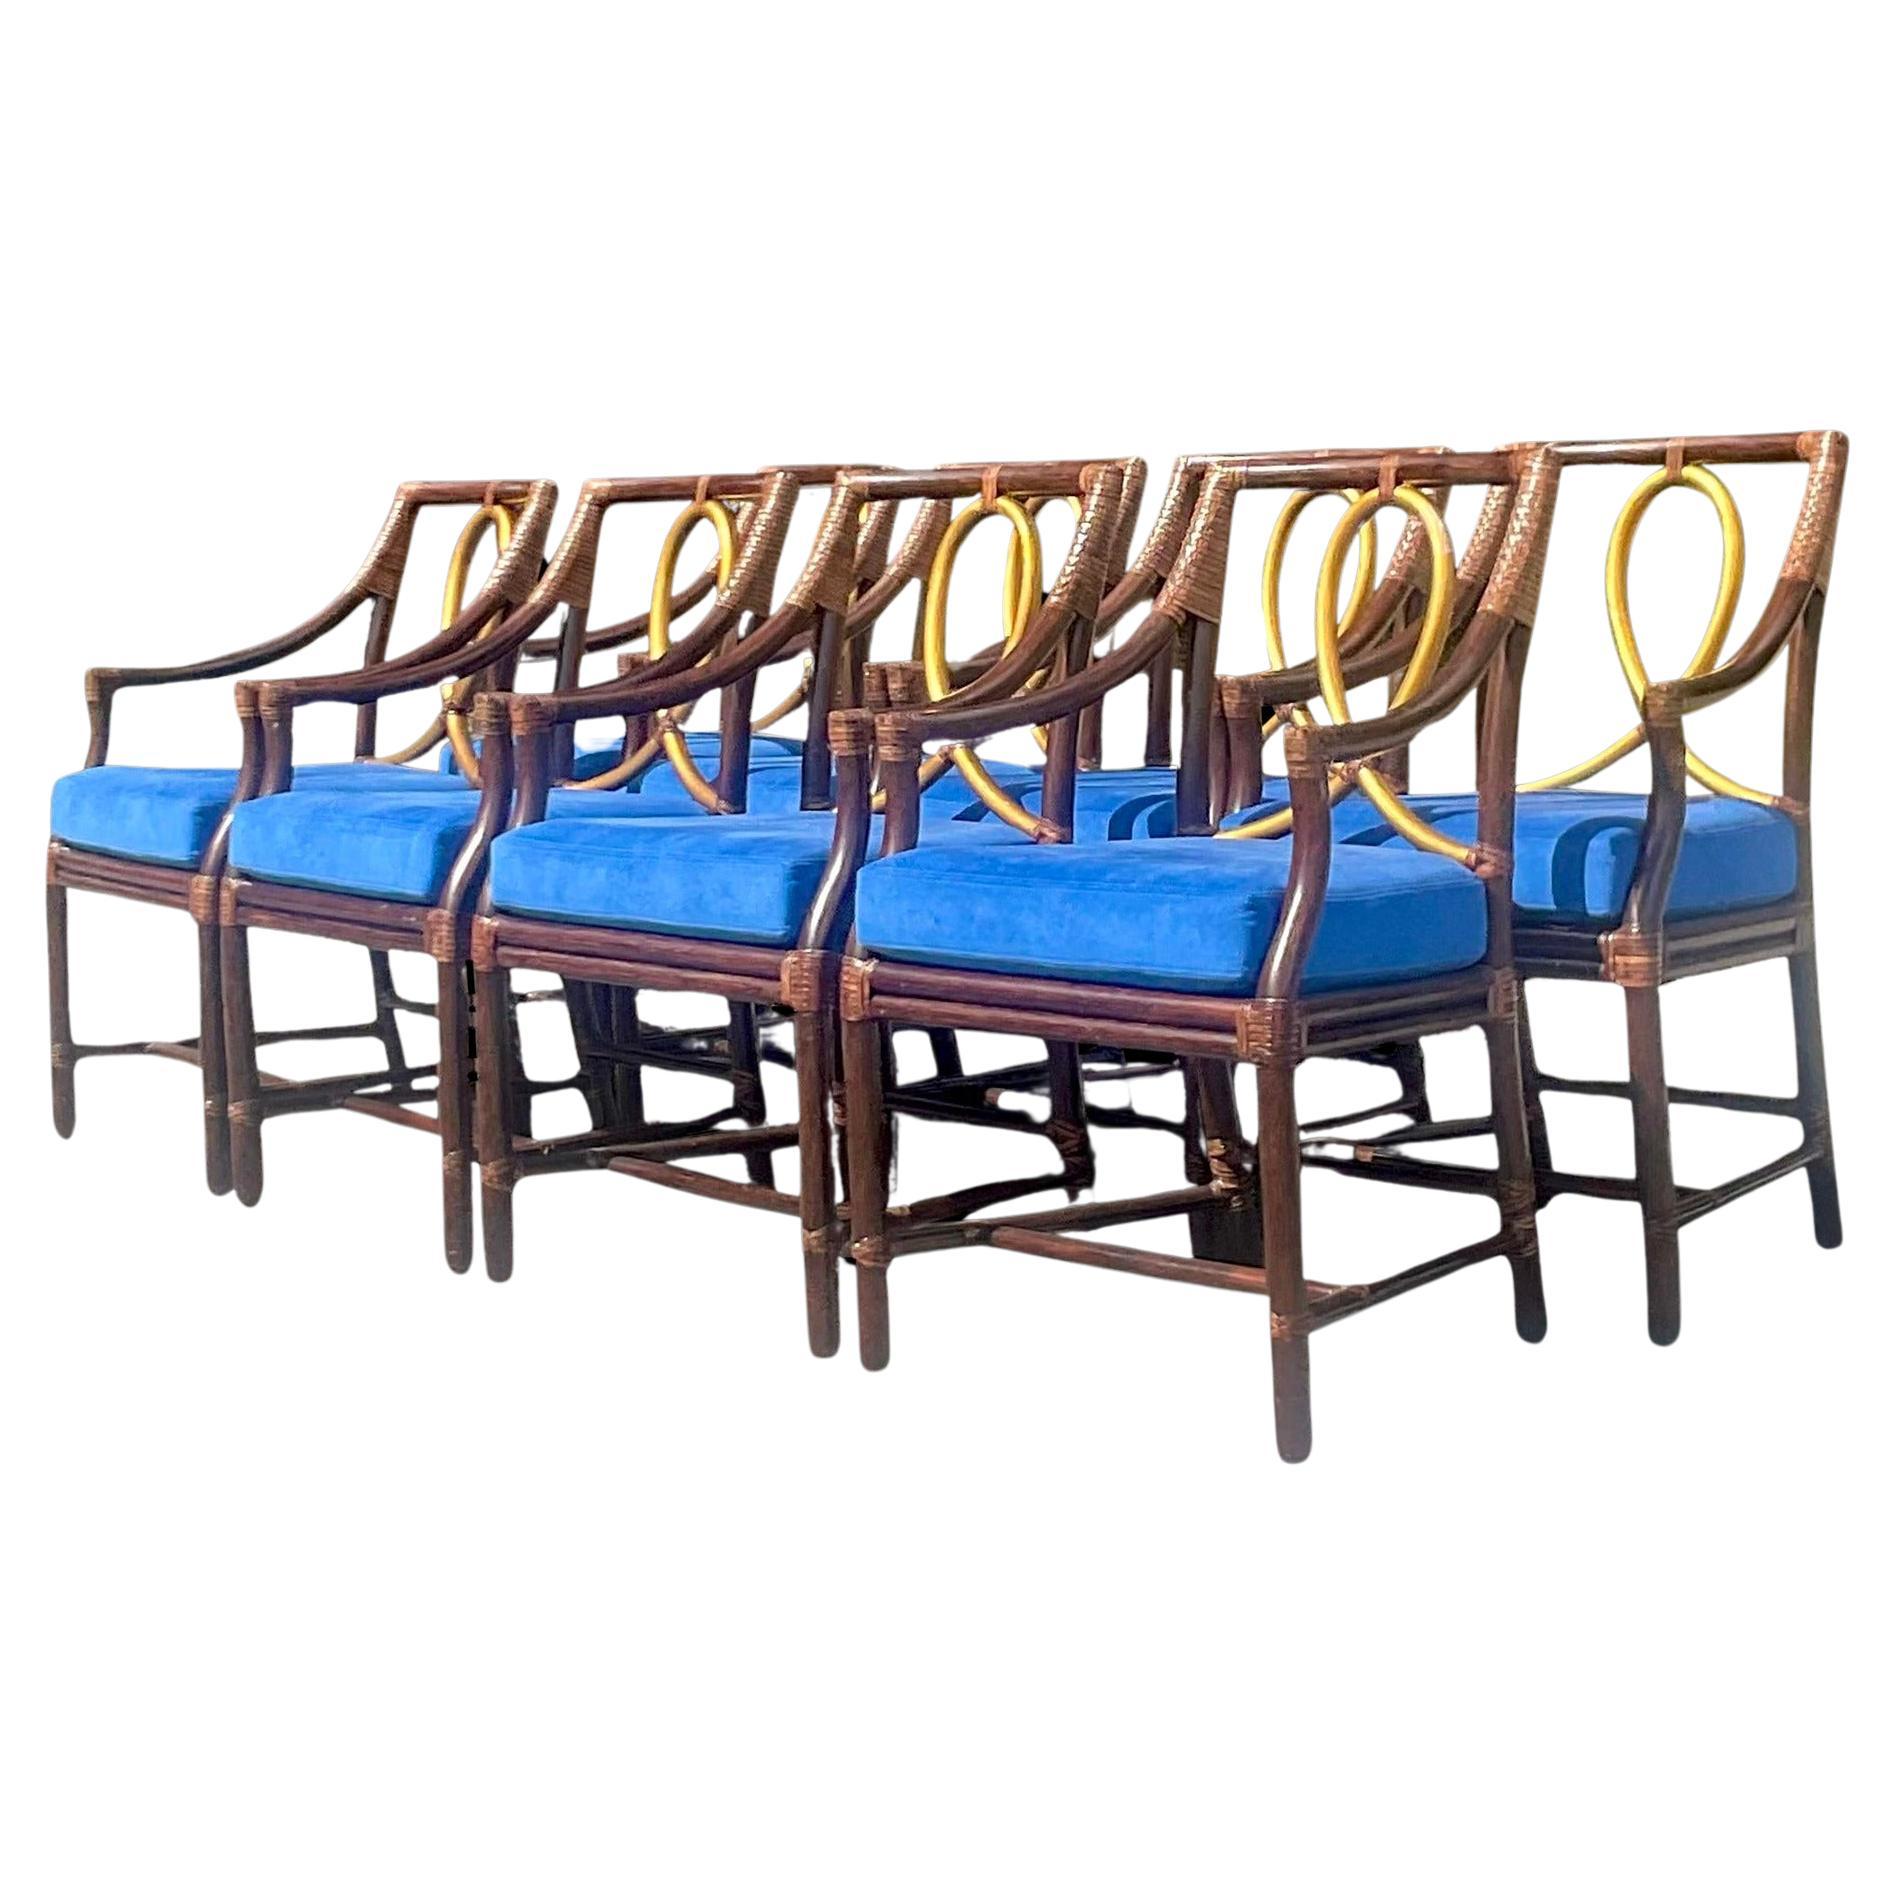 Vintage Coastal Tagged McGuire Gilt Loop Rattan Dining Chairs - Set of 8 For Sale